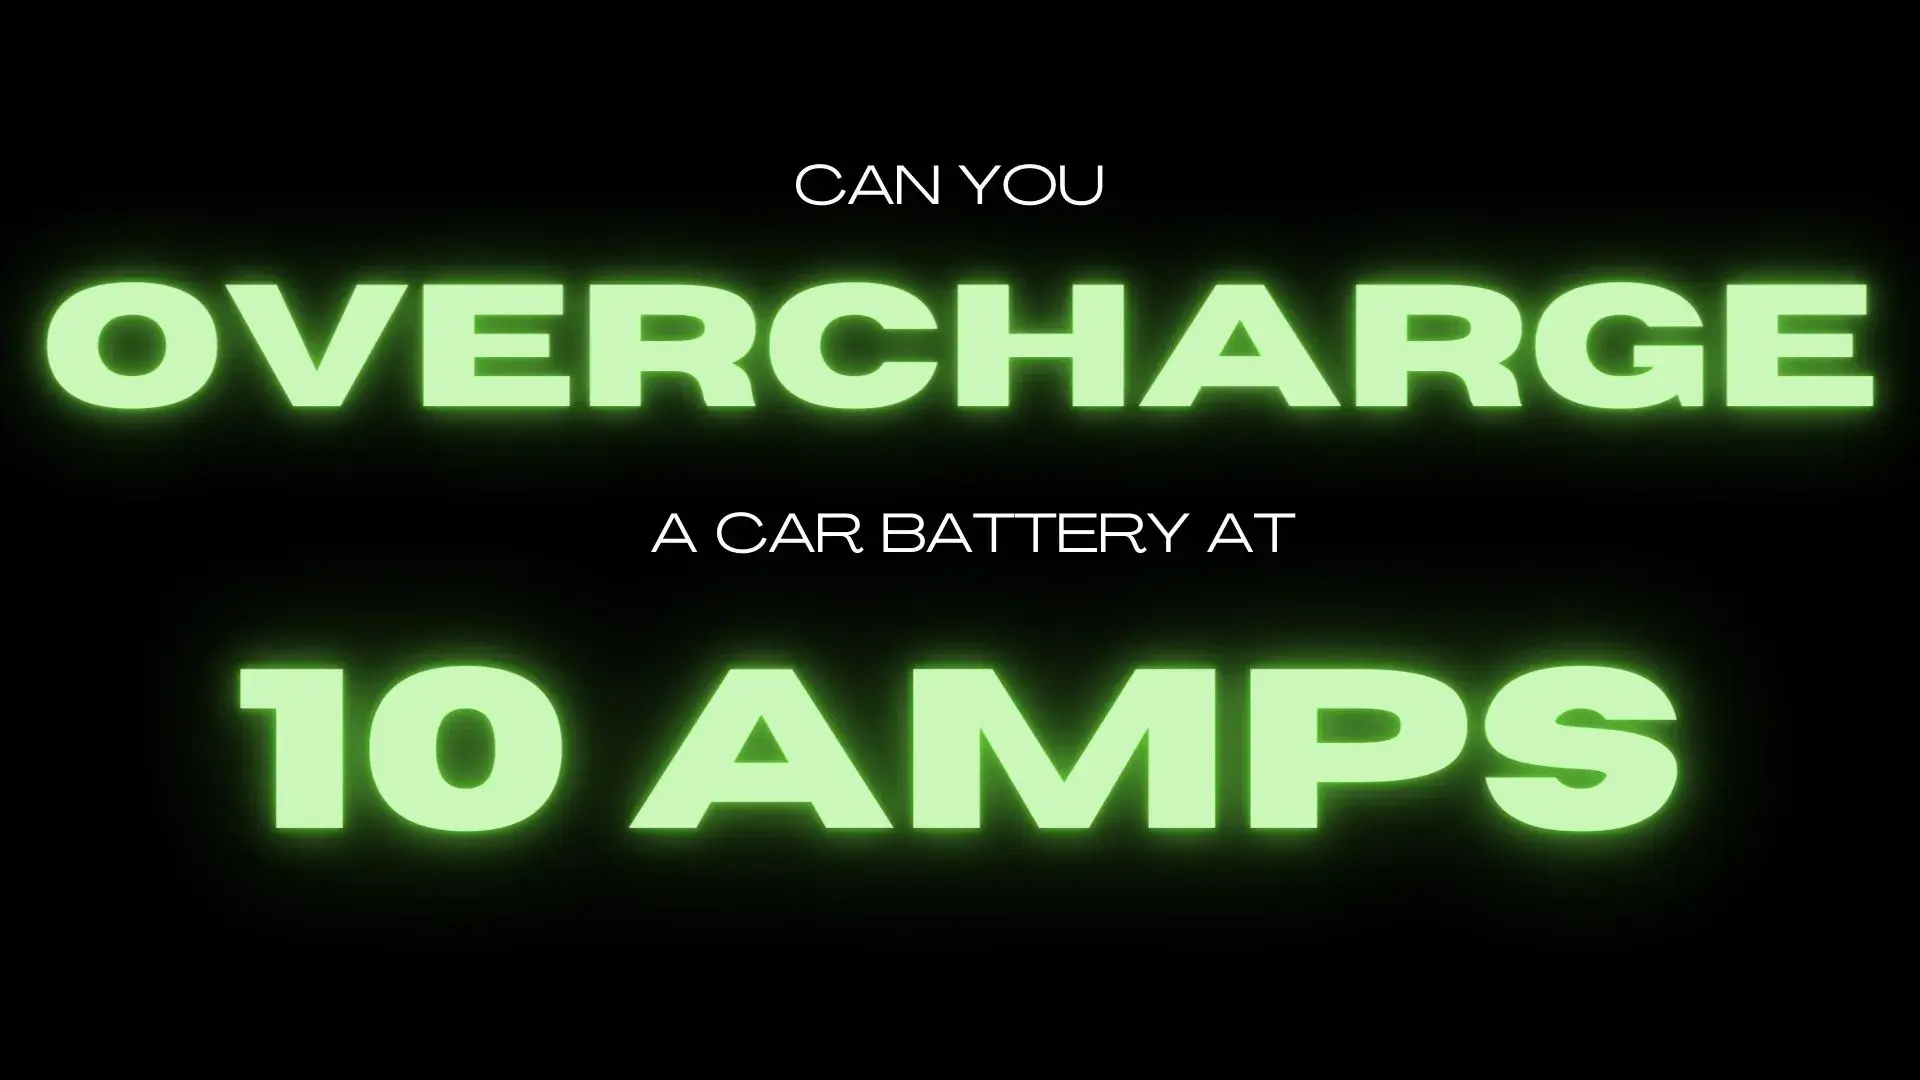 Can You Overcharge a Car Battery at 10 Amps